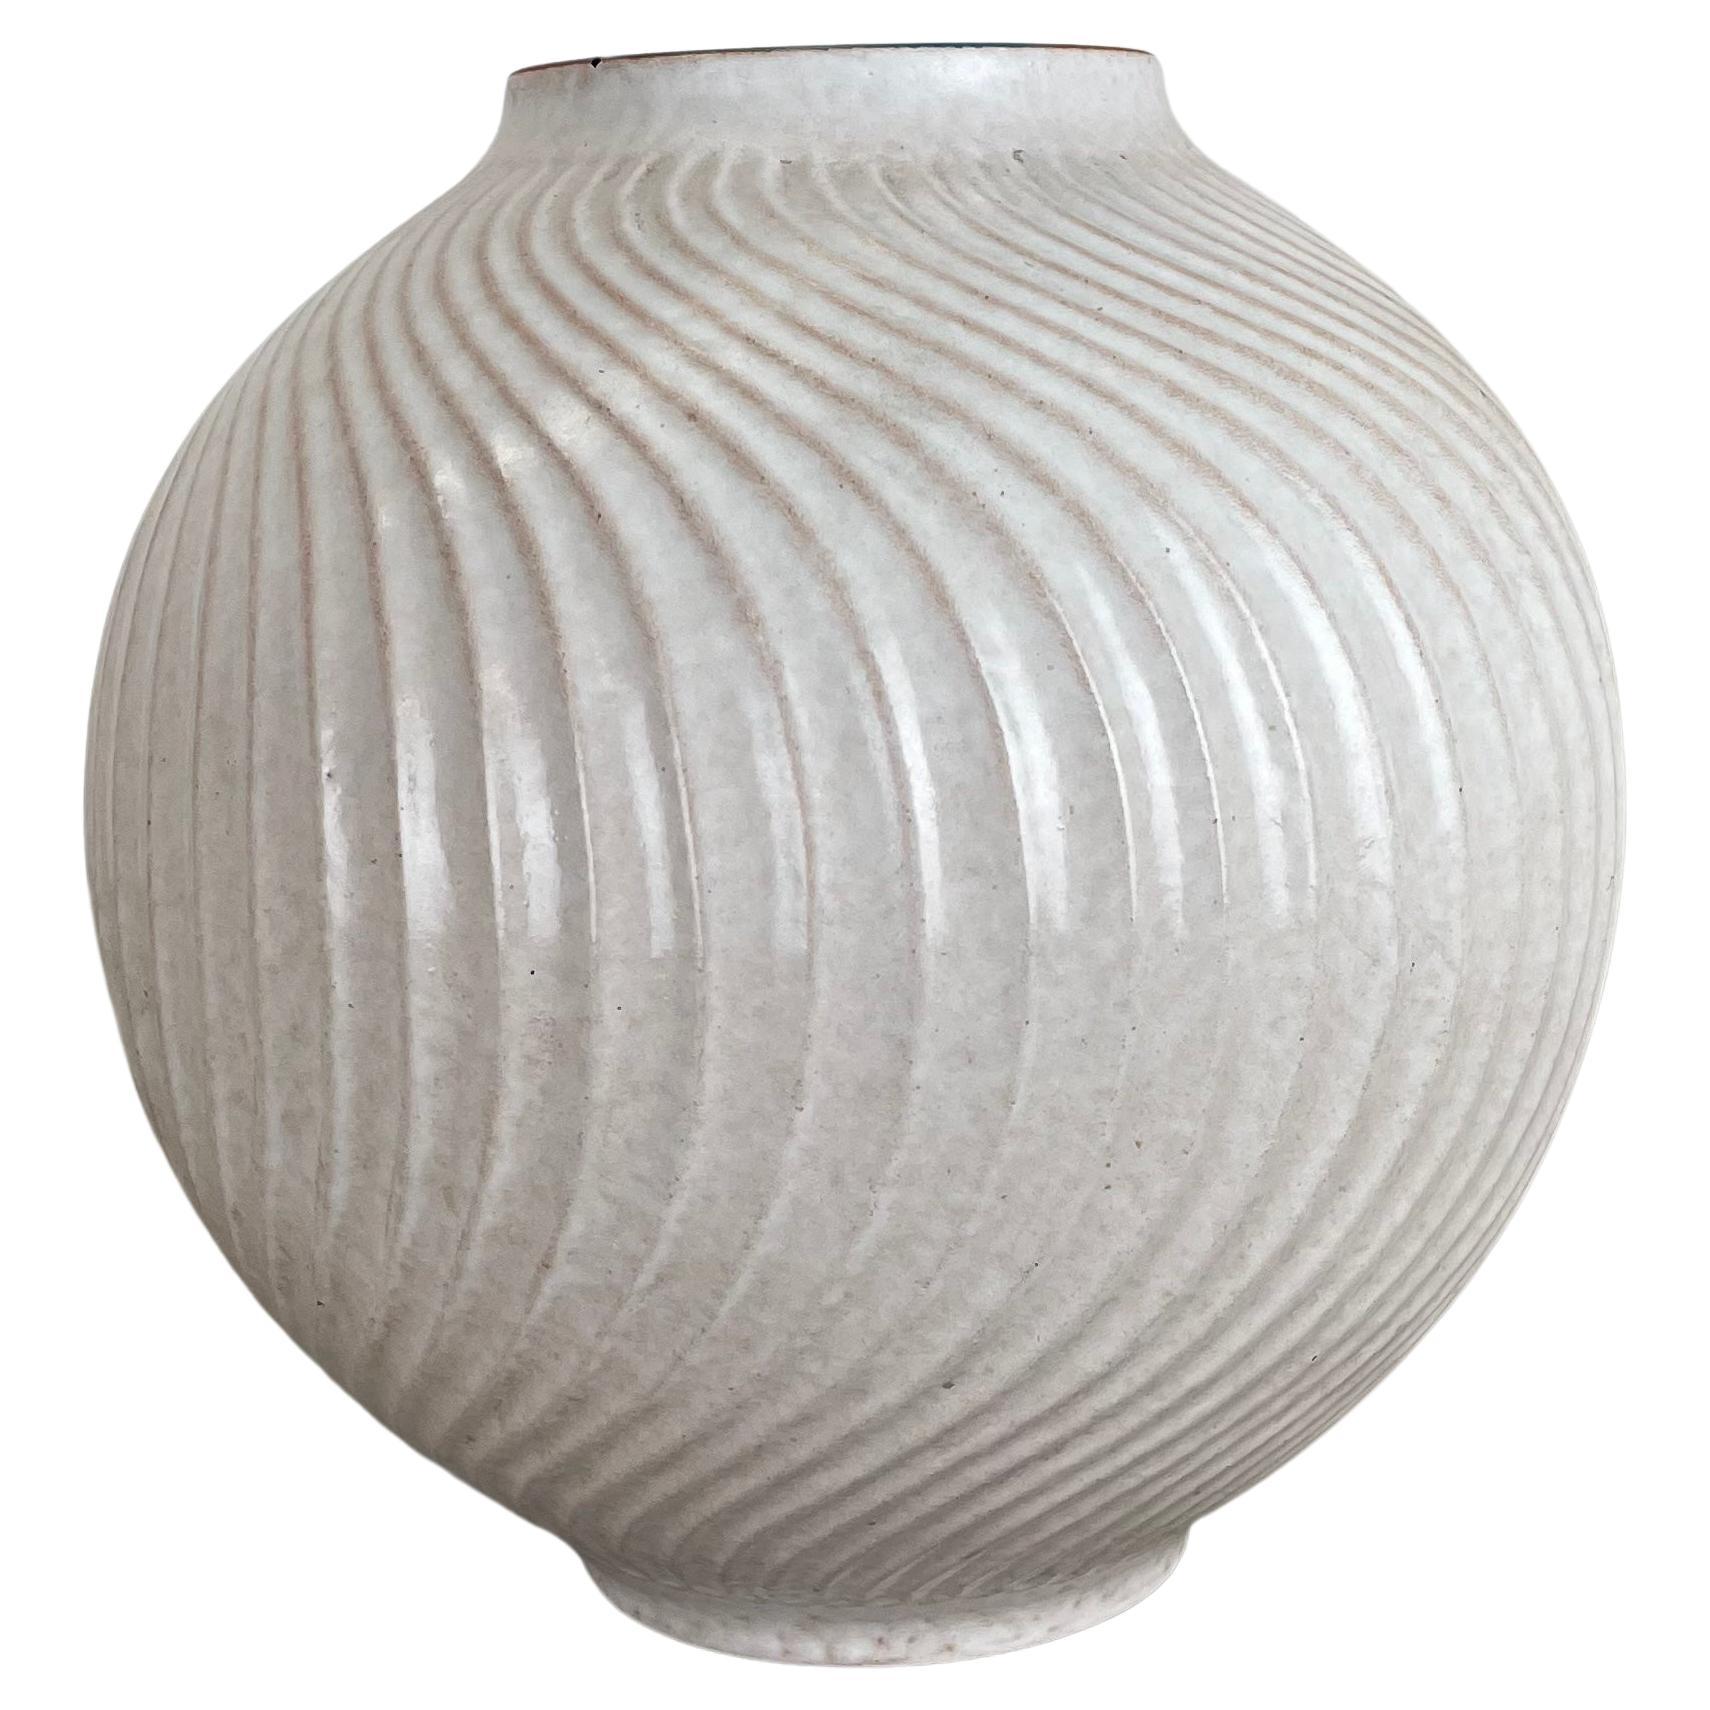 Super Rare "SWIRL" Fat Lava Pottery Vase by Scheurich Ceramics, Germany, 1970s For Sale